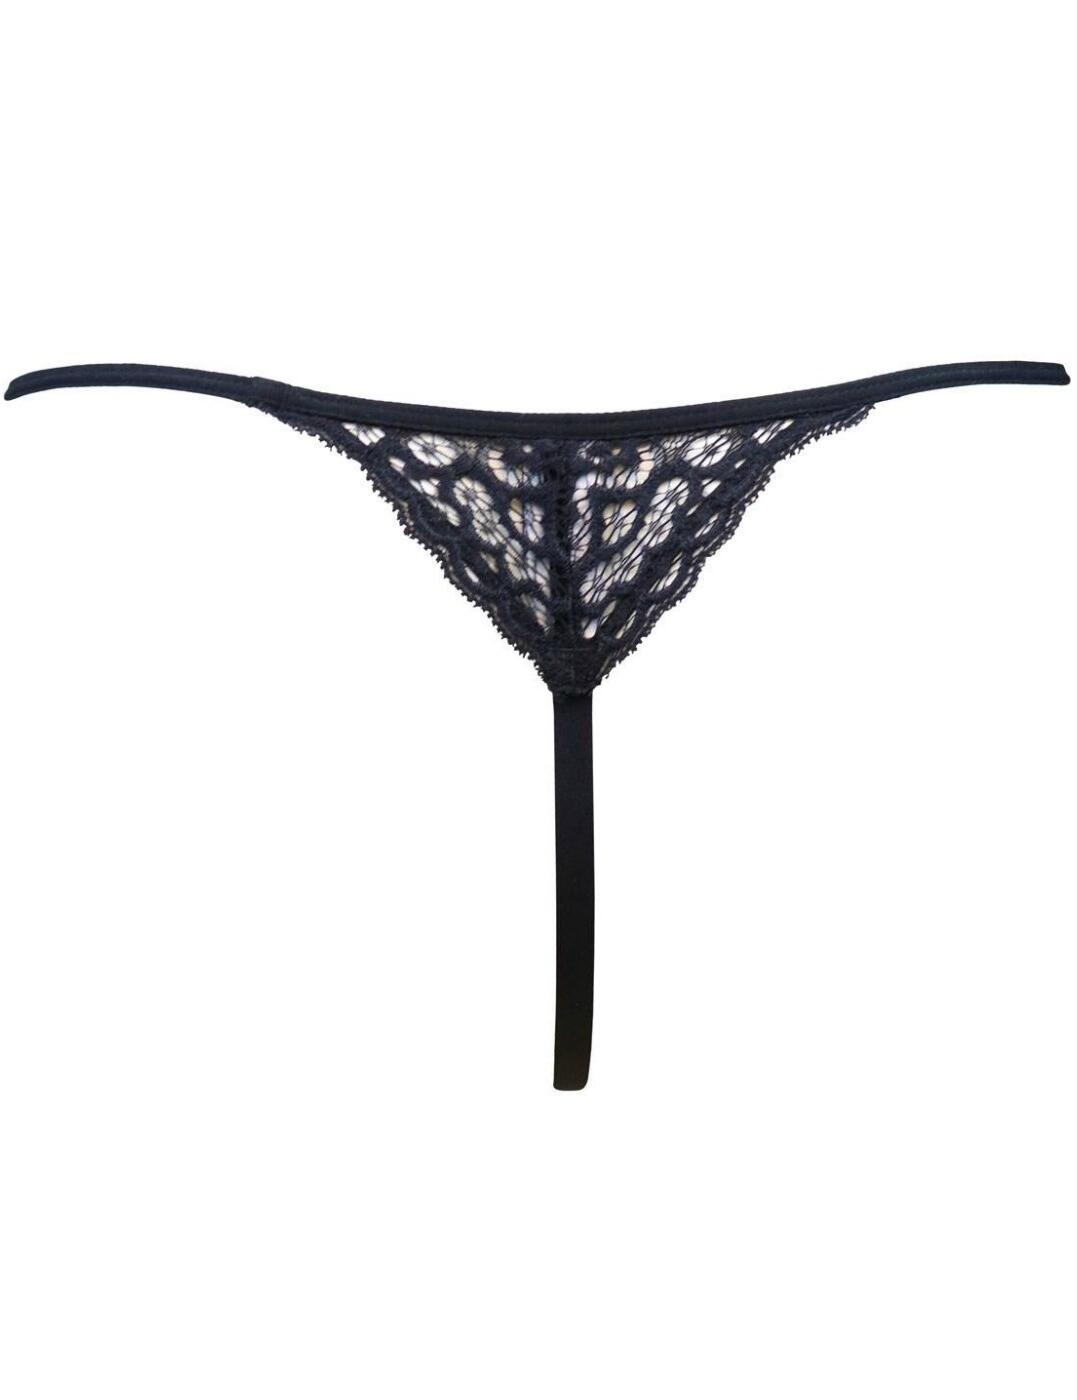 Amour Accent Thong, Pour Moi, Amour Accent Thong, Black/Pink